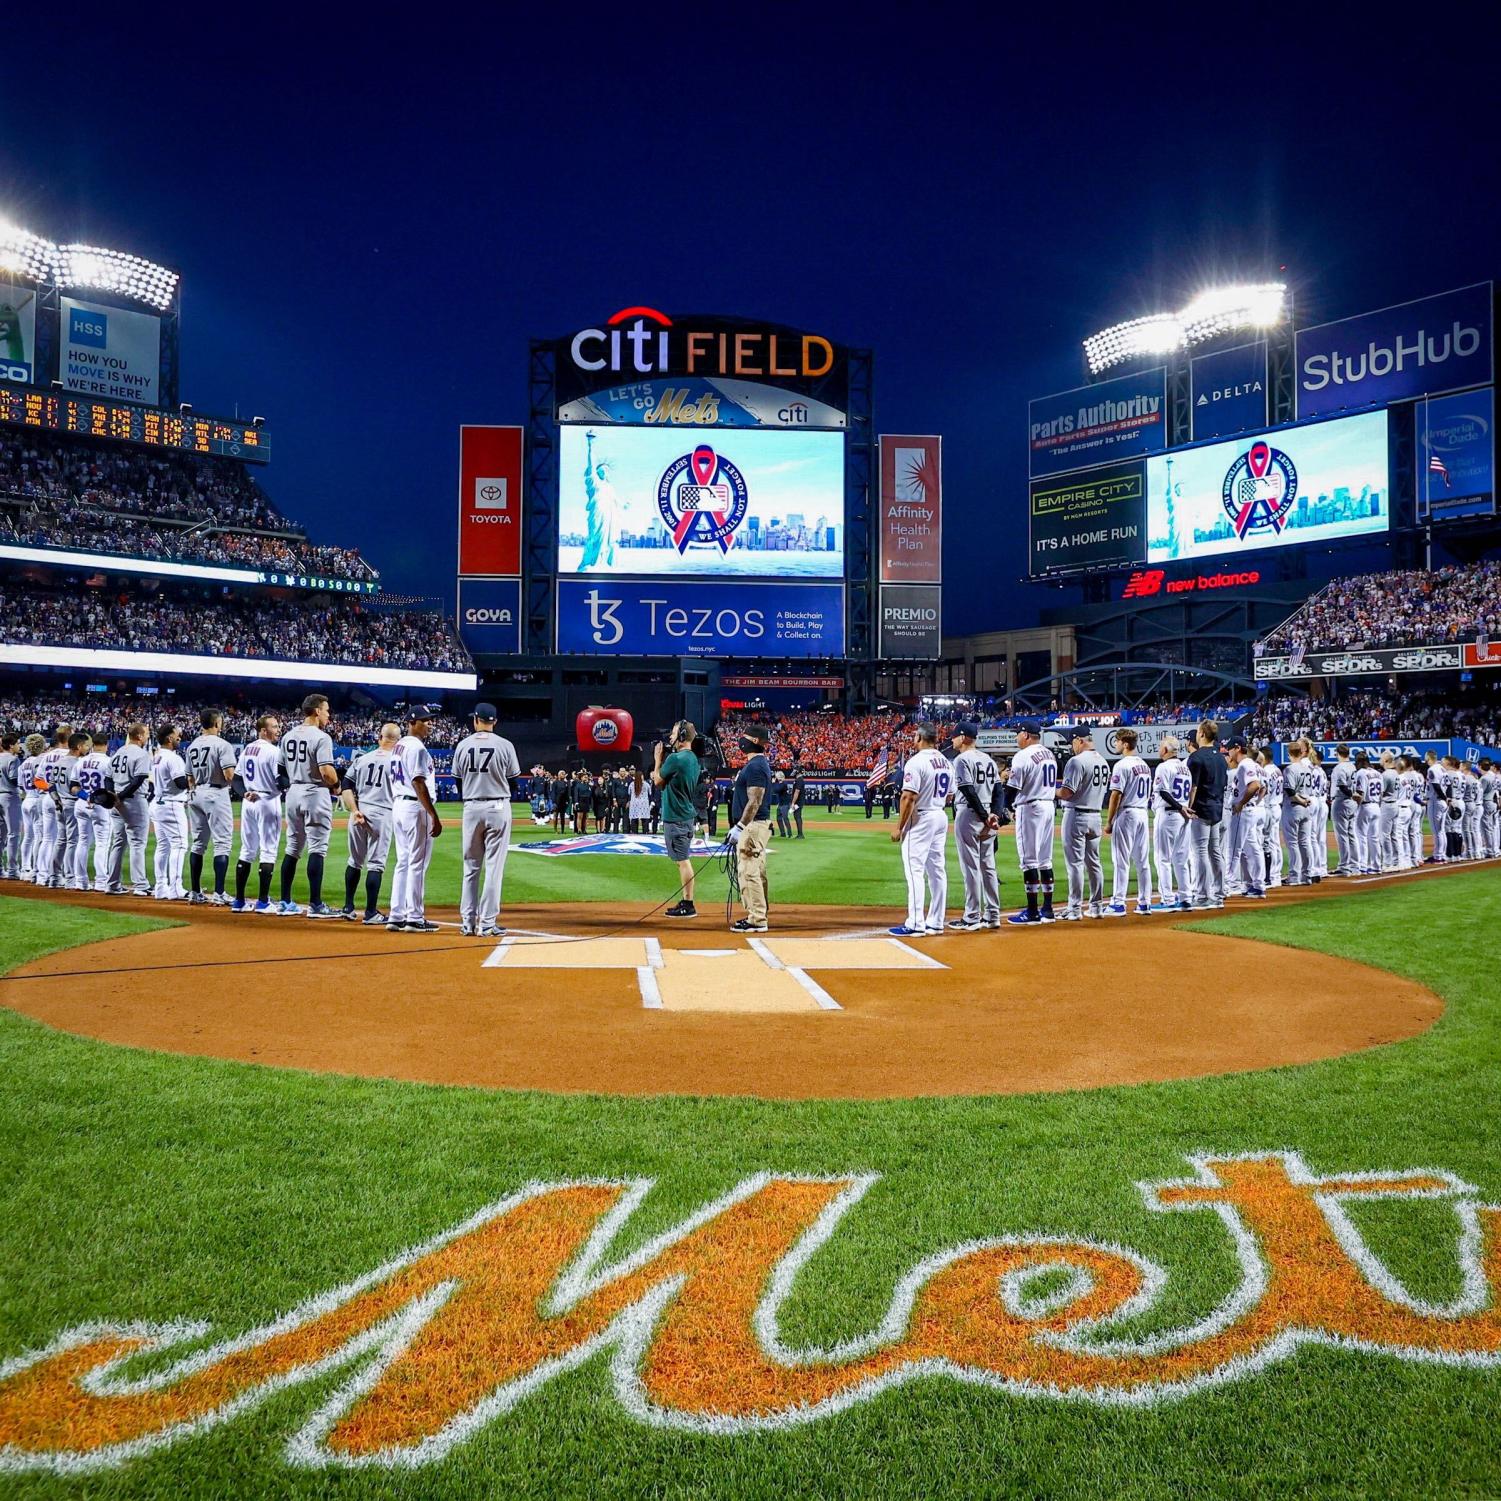 Yankees, Mets announce lineups for Tuesday's Subway Series game at